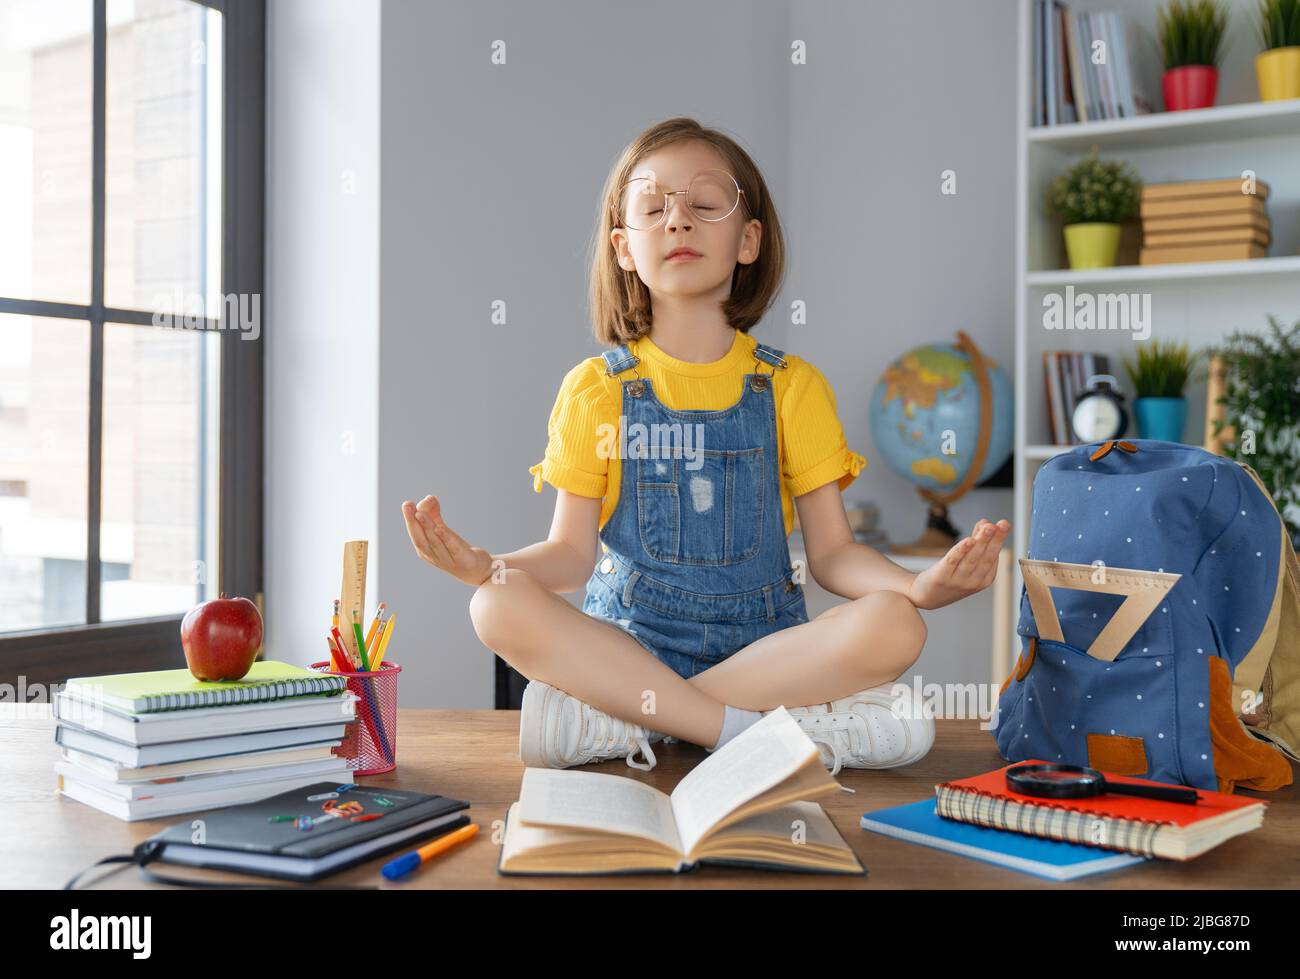 Back to school! Cute industrious child is meditating sitting at a desk indoors. Kid is learning in class or lesson. Stock Photo